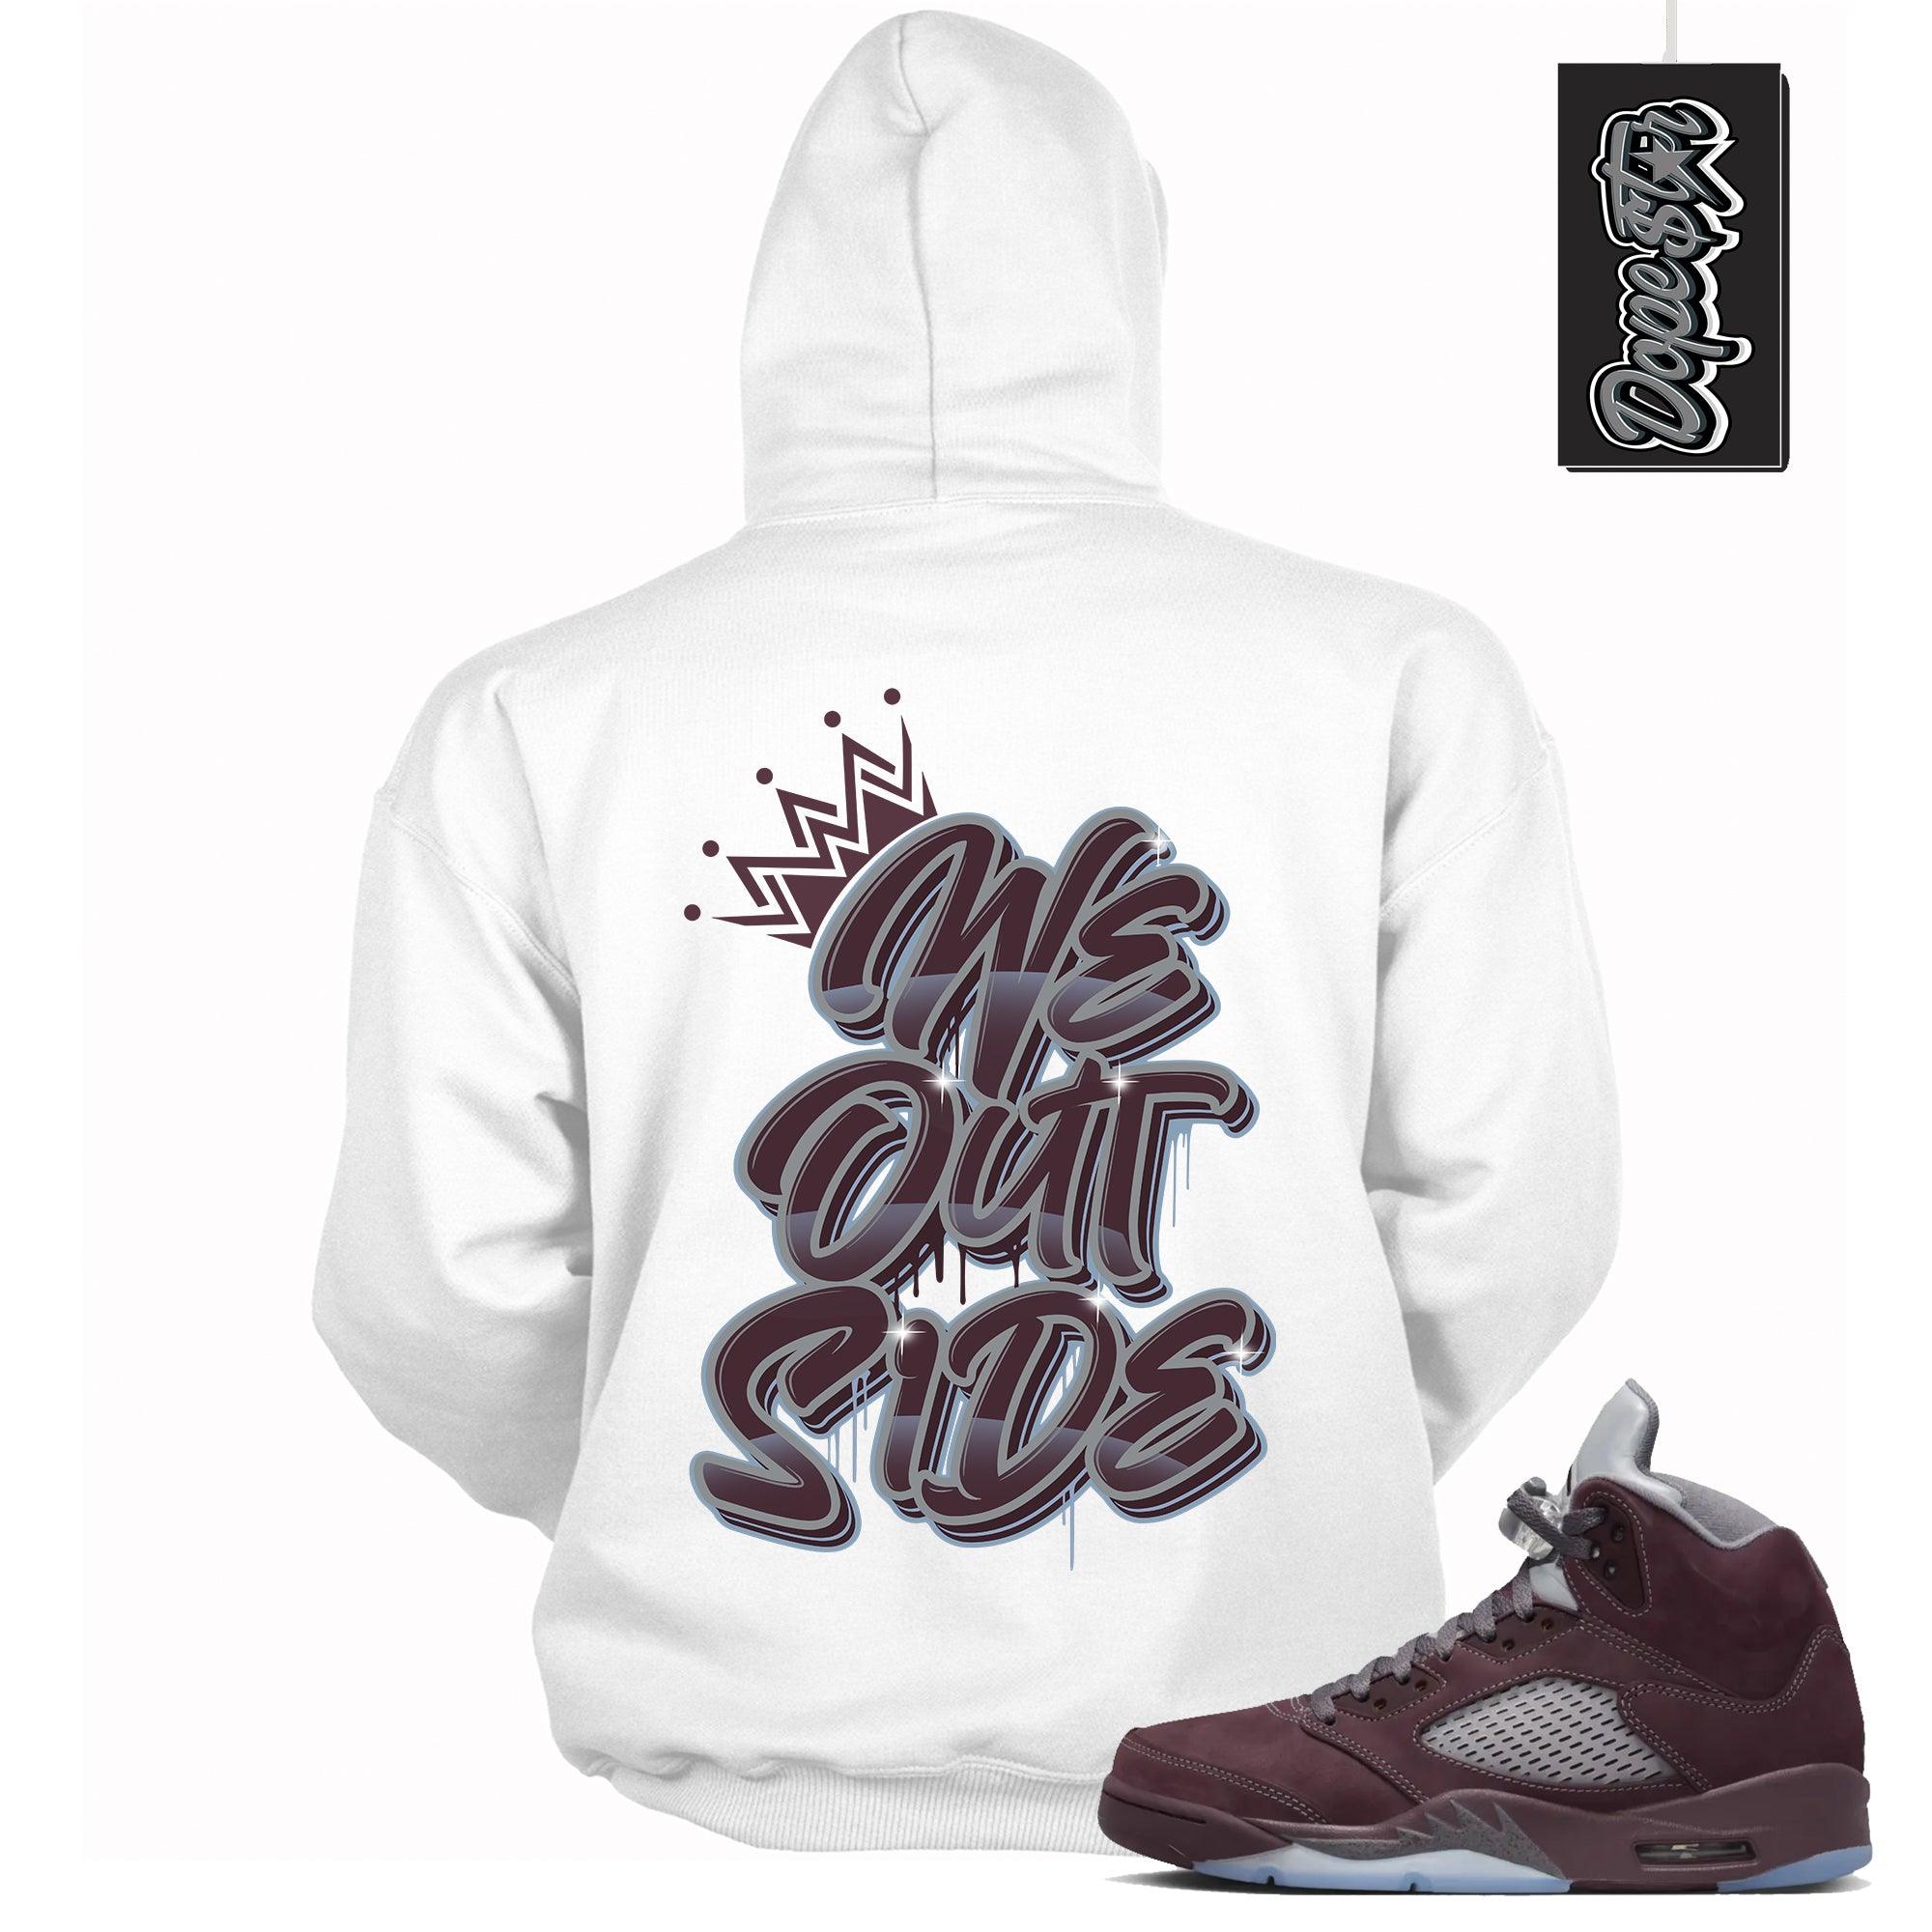 Cool White Graphic Hoodie with “ We Outside “ print, that perfectly matches Air Jordan 5 Burgundy 2023 sneakers